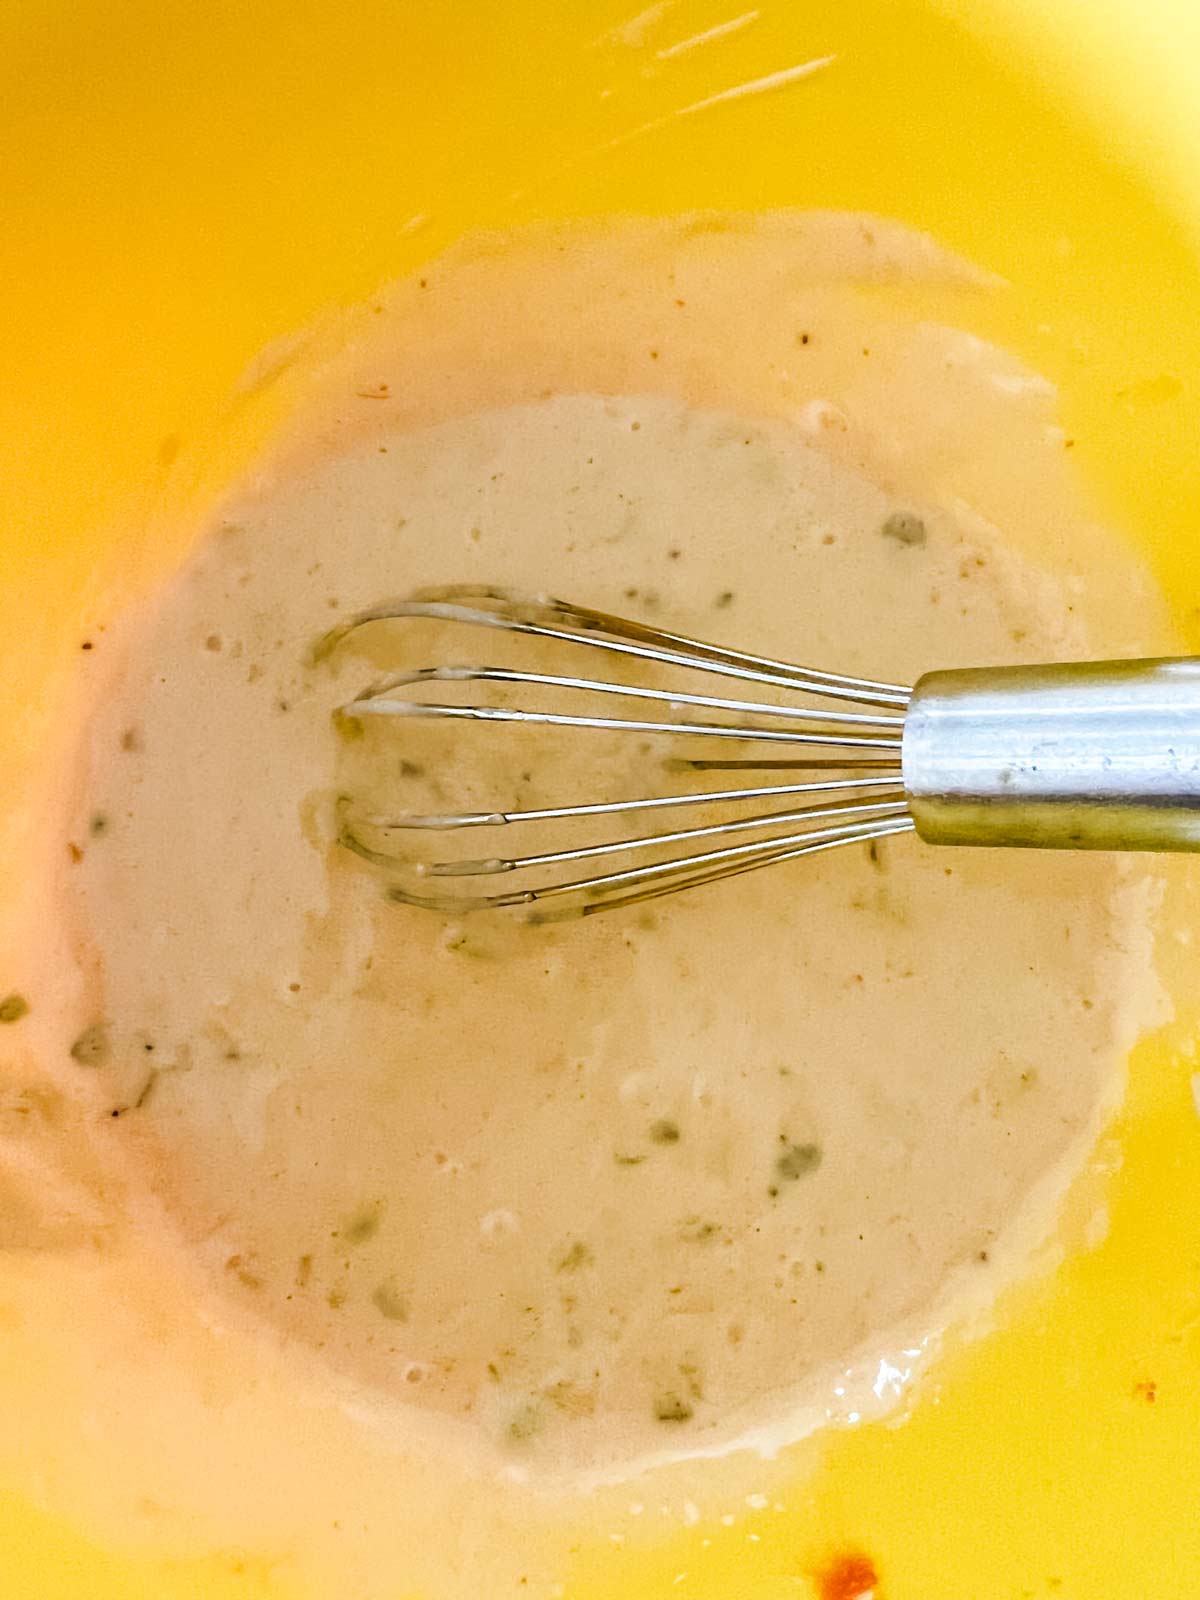 Mayonnaise , apple cider vinegar, pickle relish, yellow mustard, sugar, hot sauce, salt and pepper in a bowl whisked together.